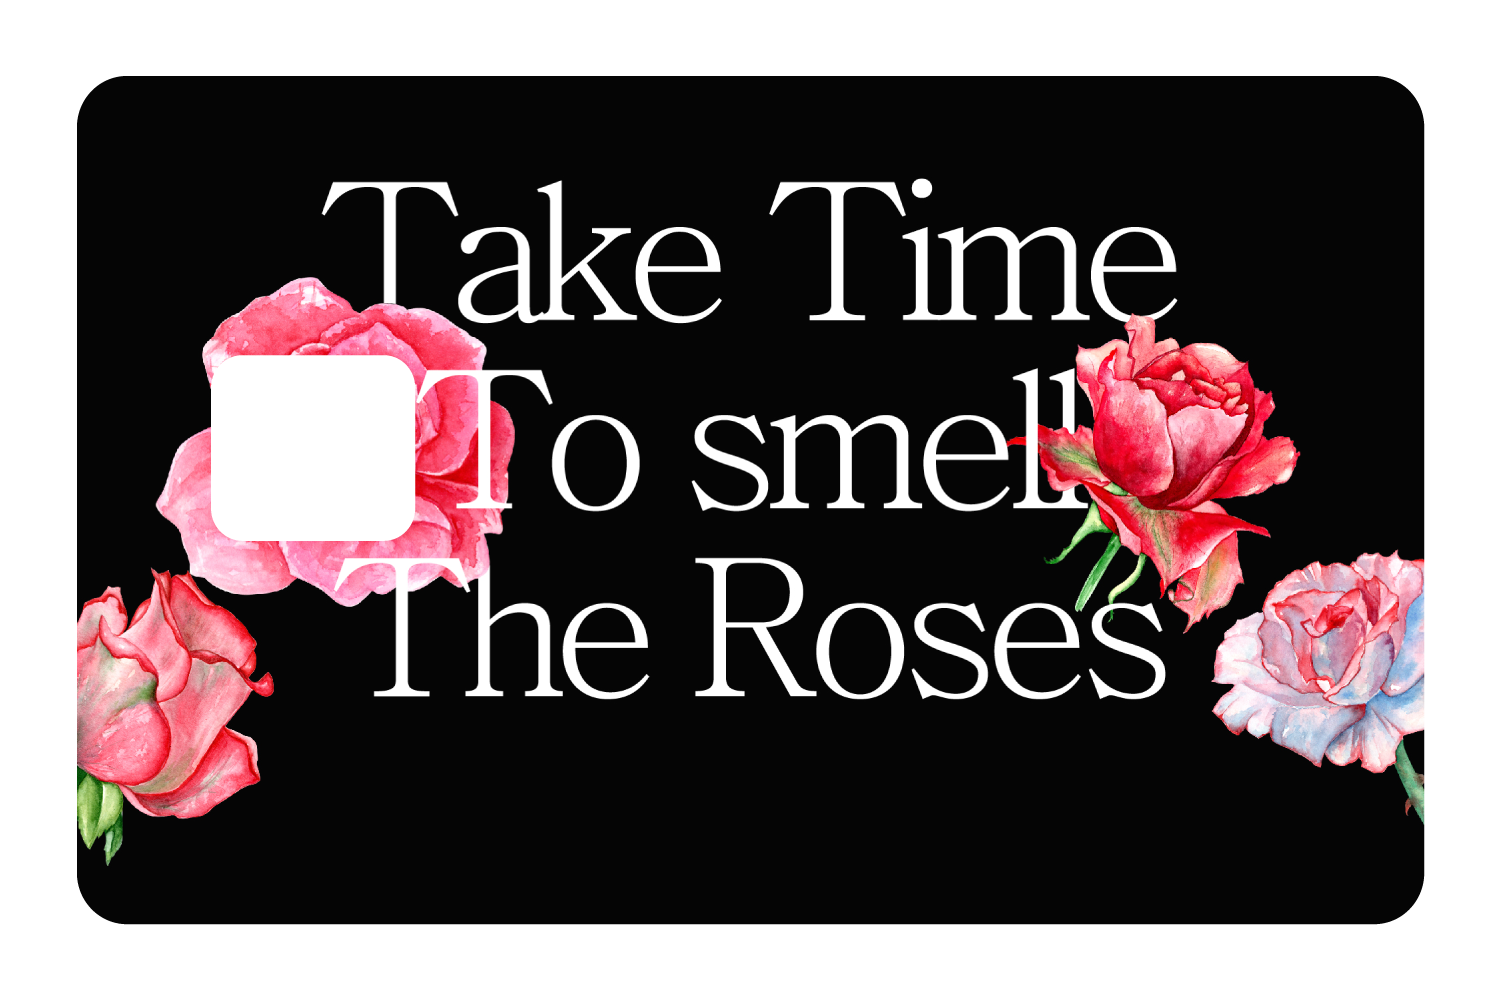 Take Time To Smell The roses